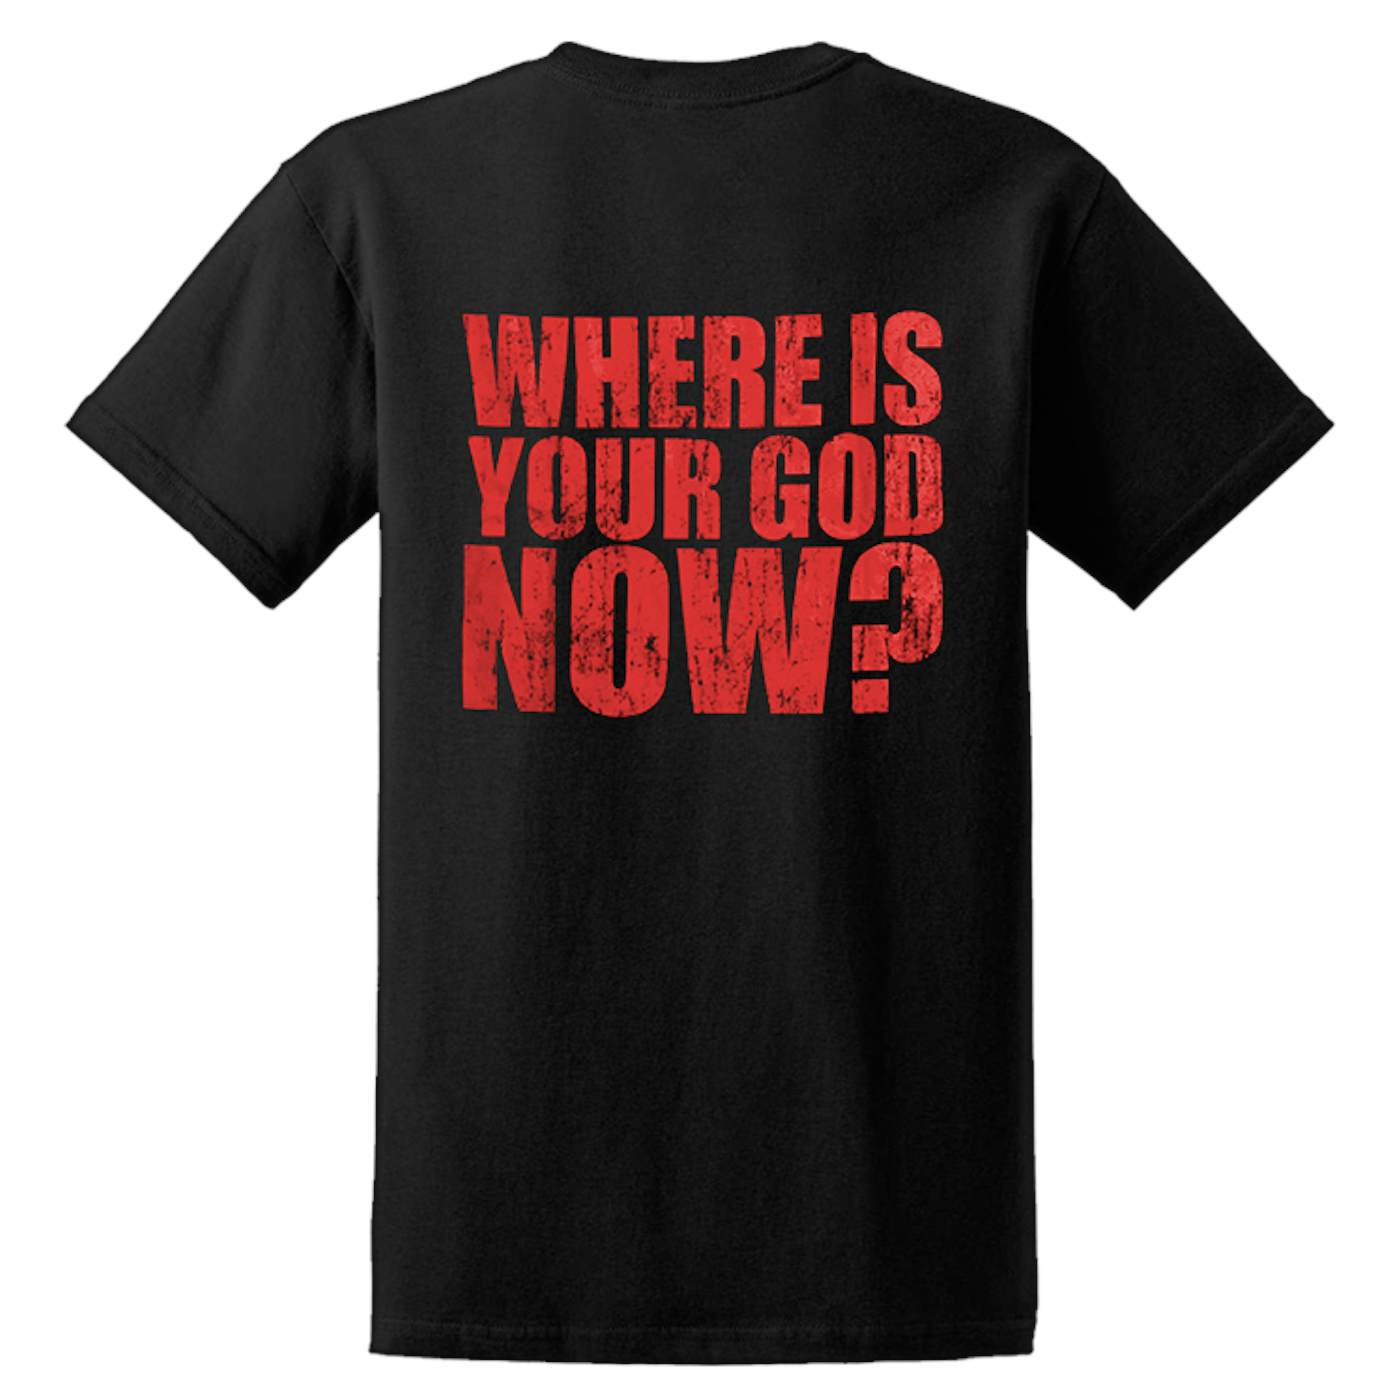 VITAL REMAINS - 'Where Is Your God Now' T-Shirt